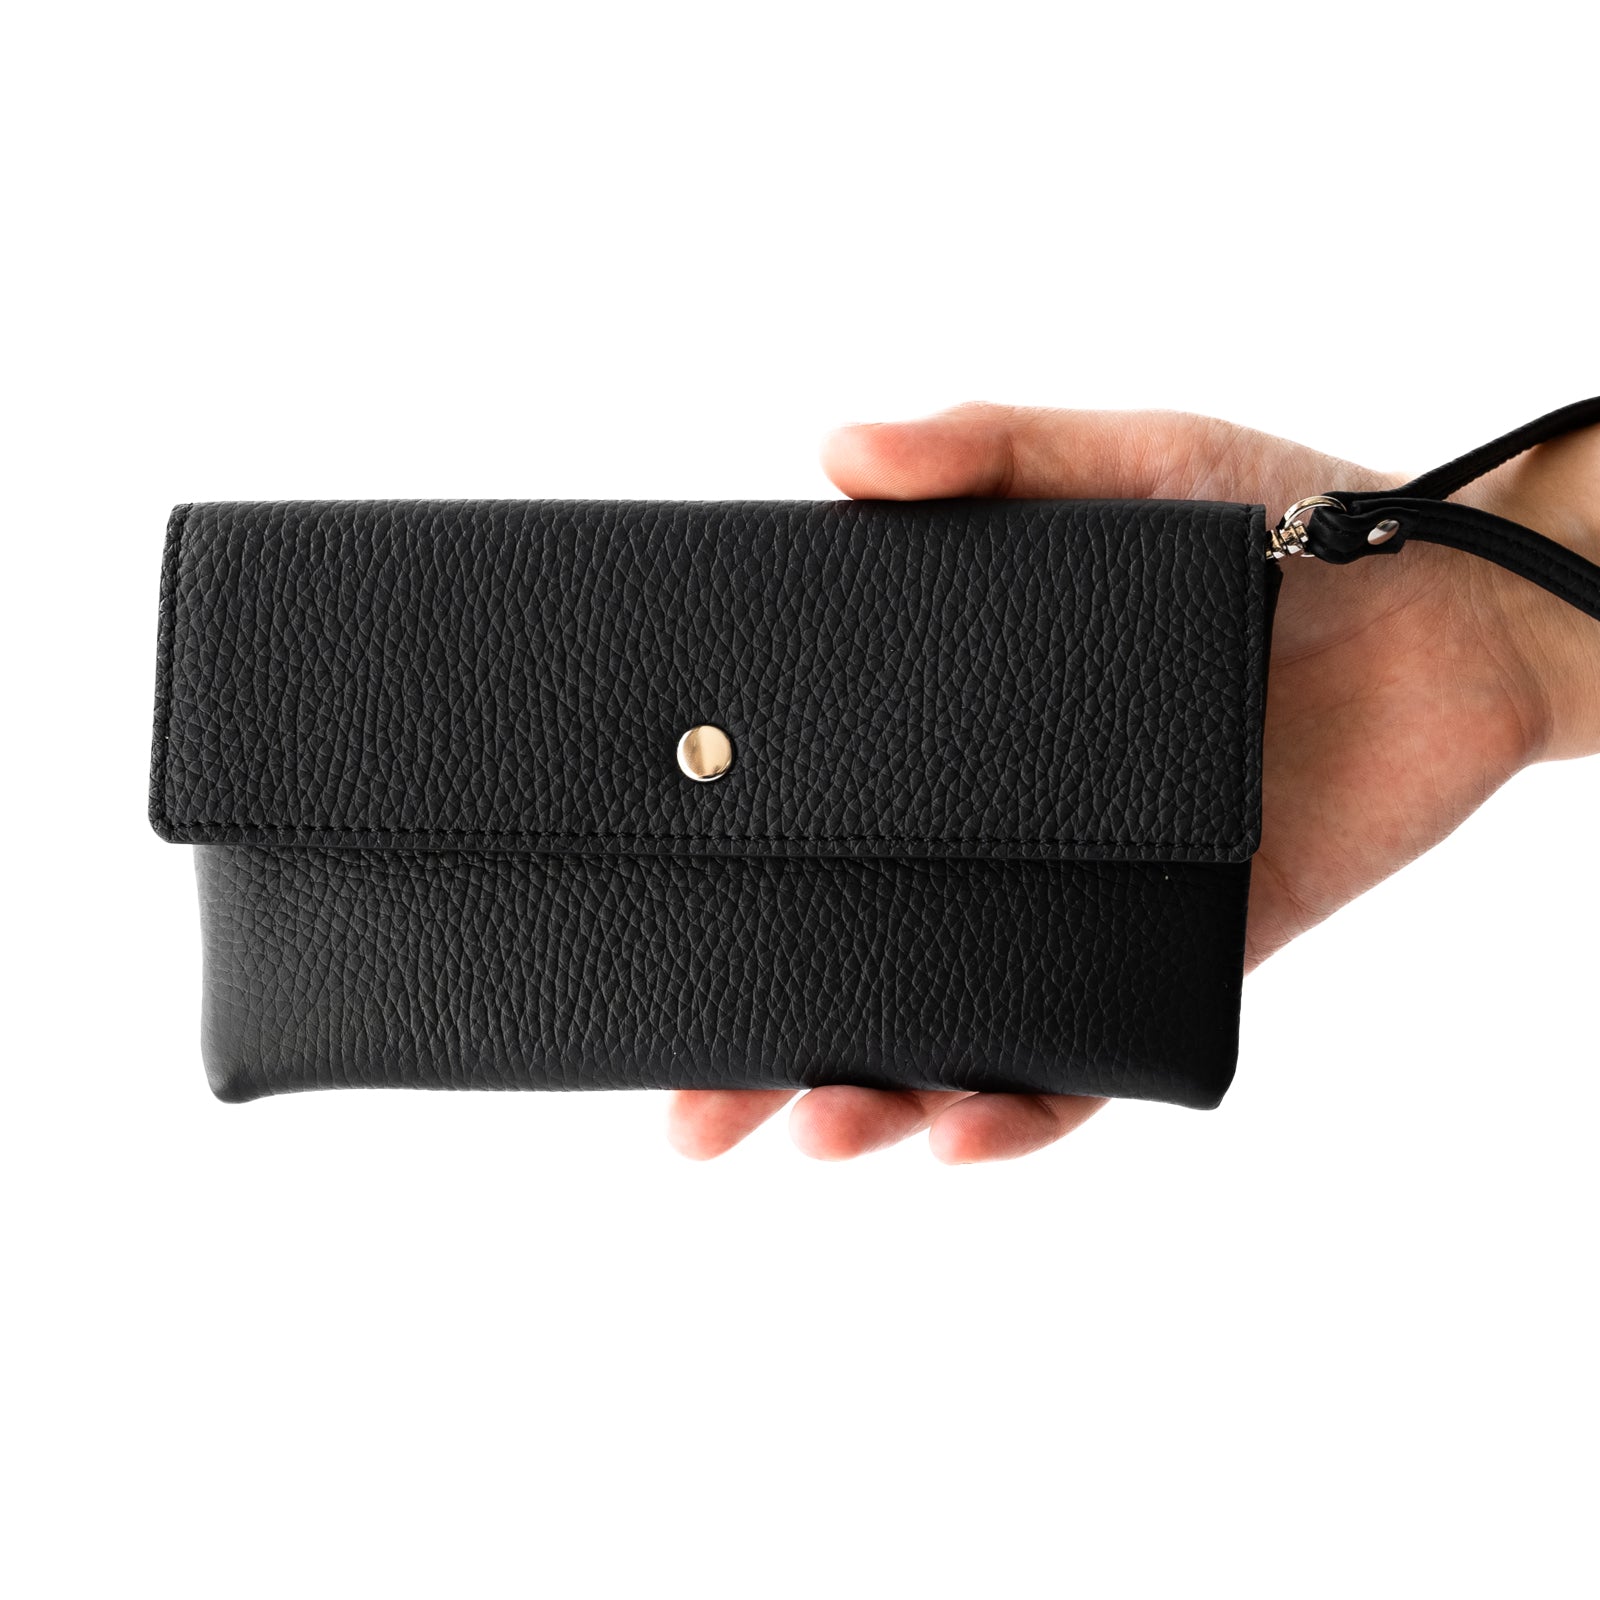 All-in-one wallet《Franc》